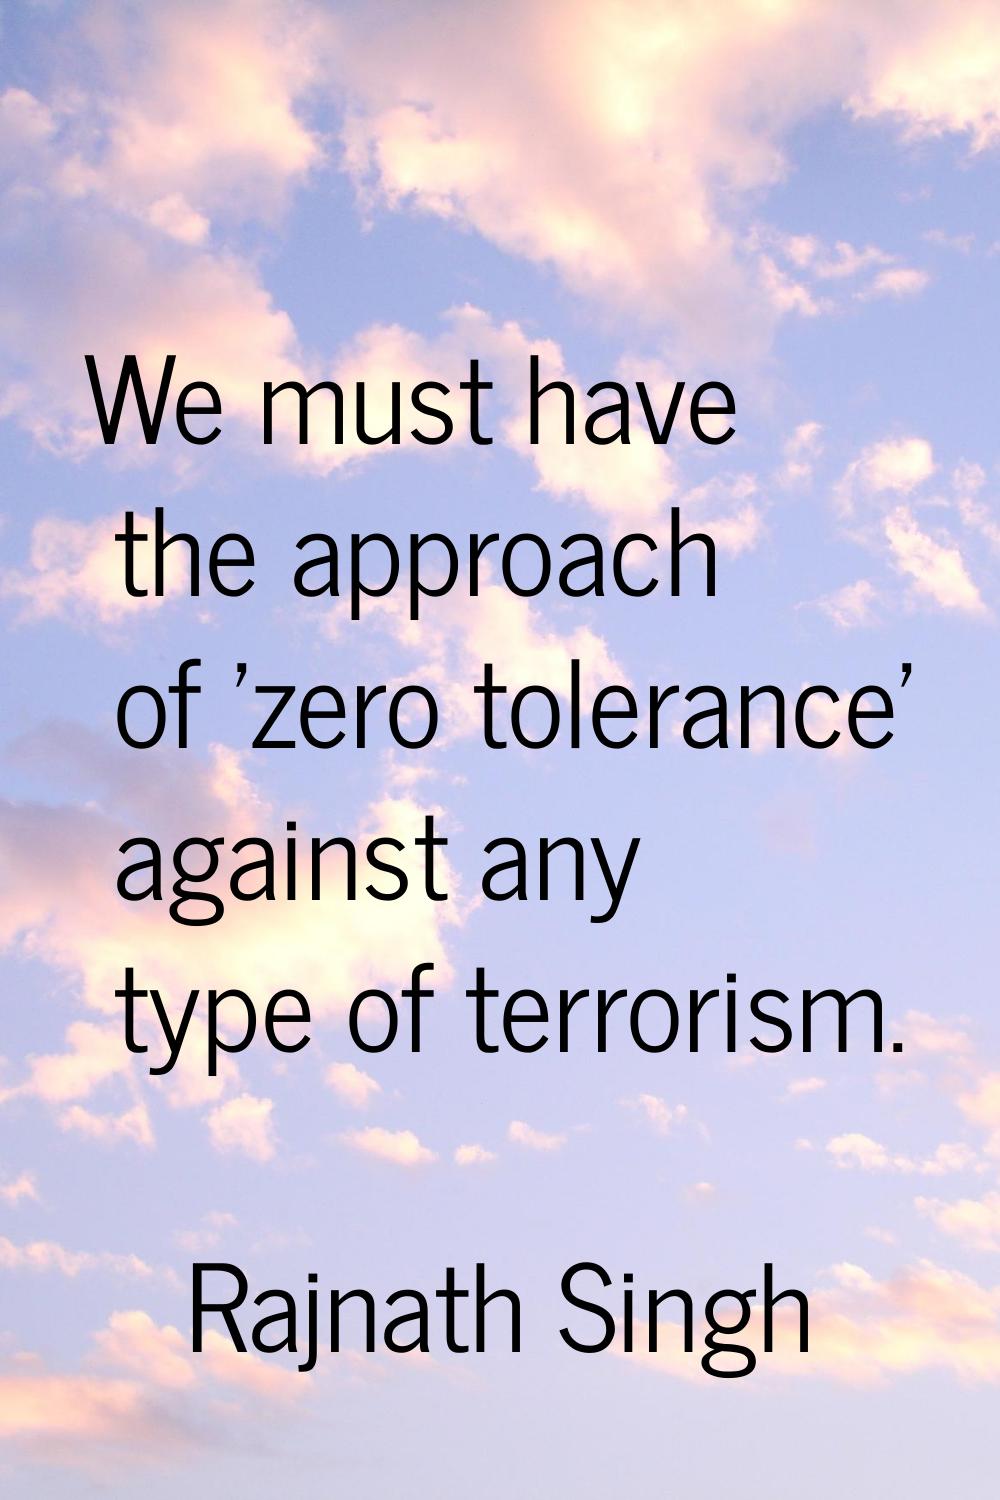 We must have the approach of 'zero tolerance' against any type of terrorism.